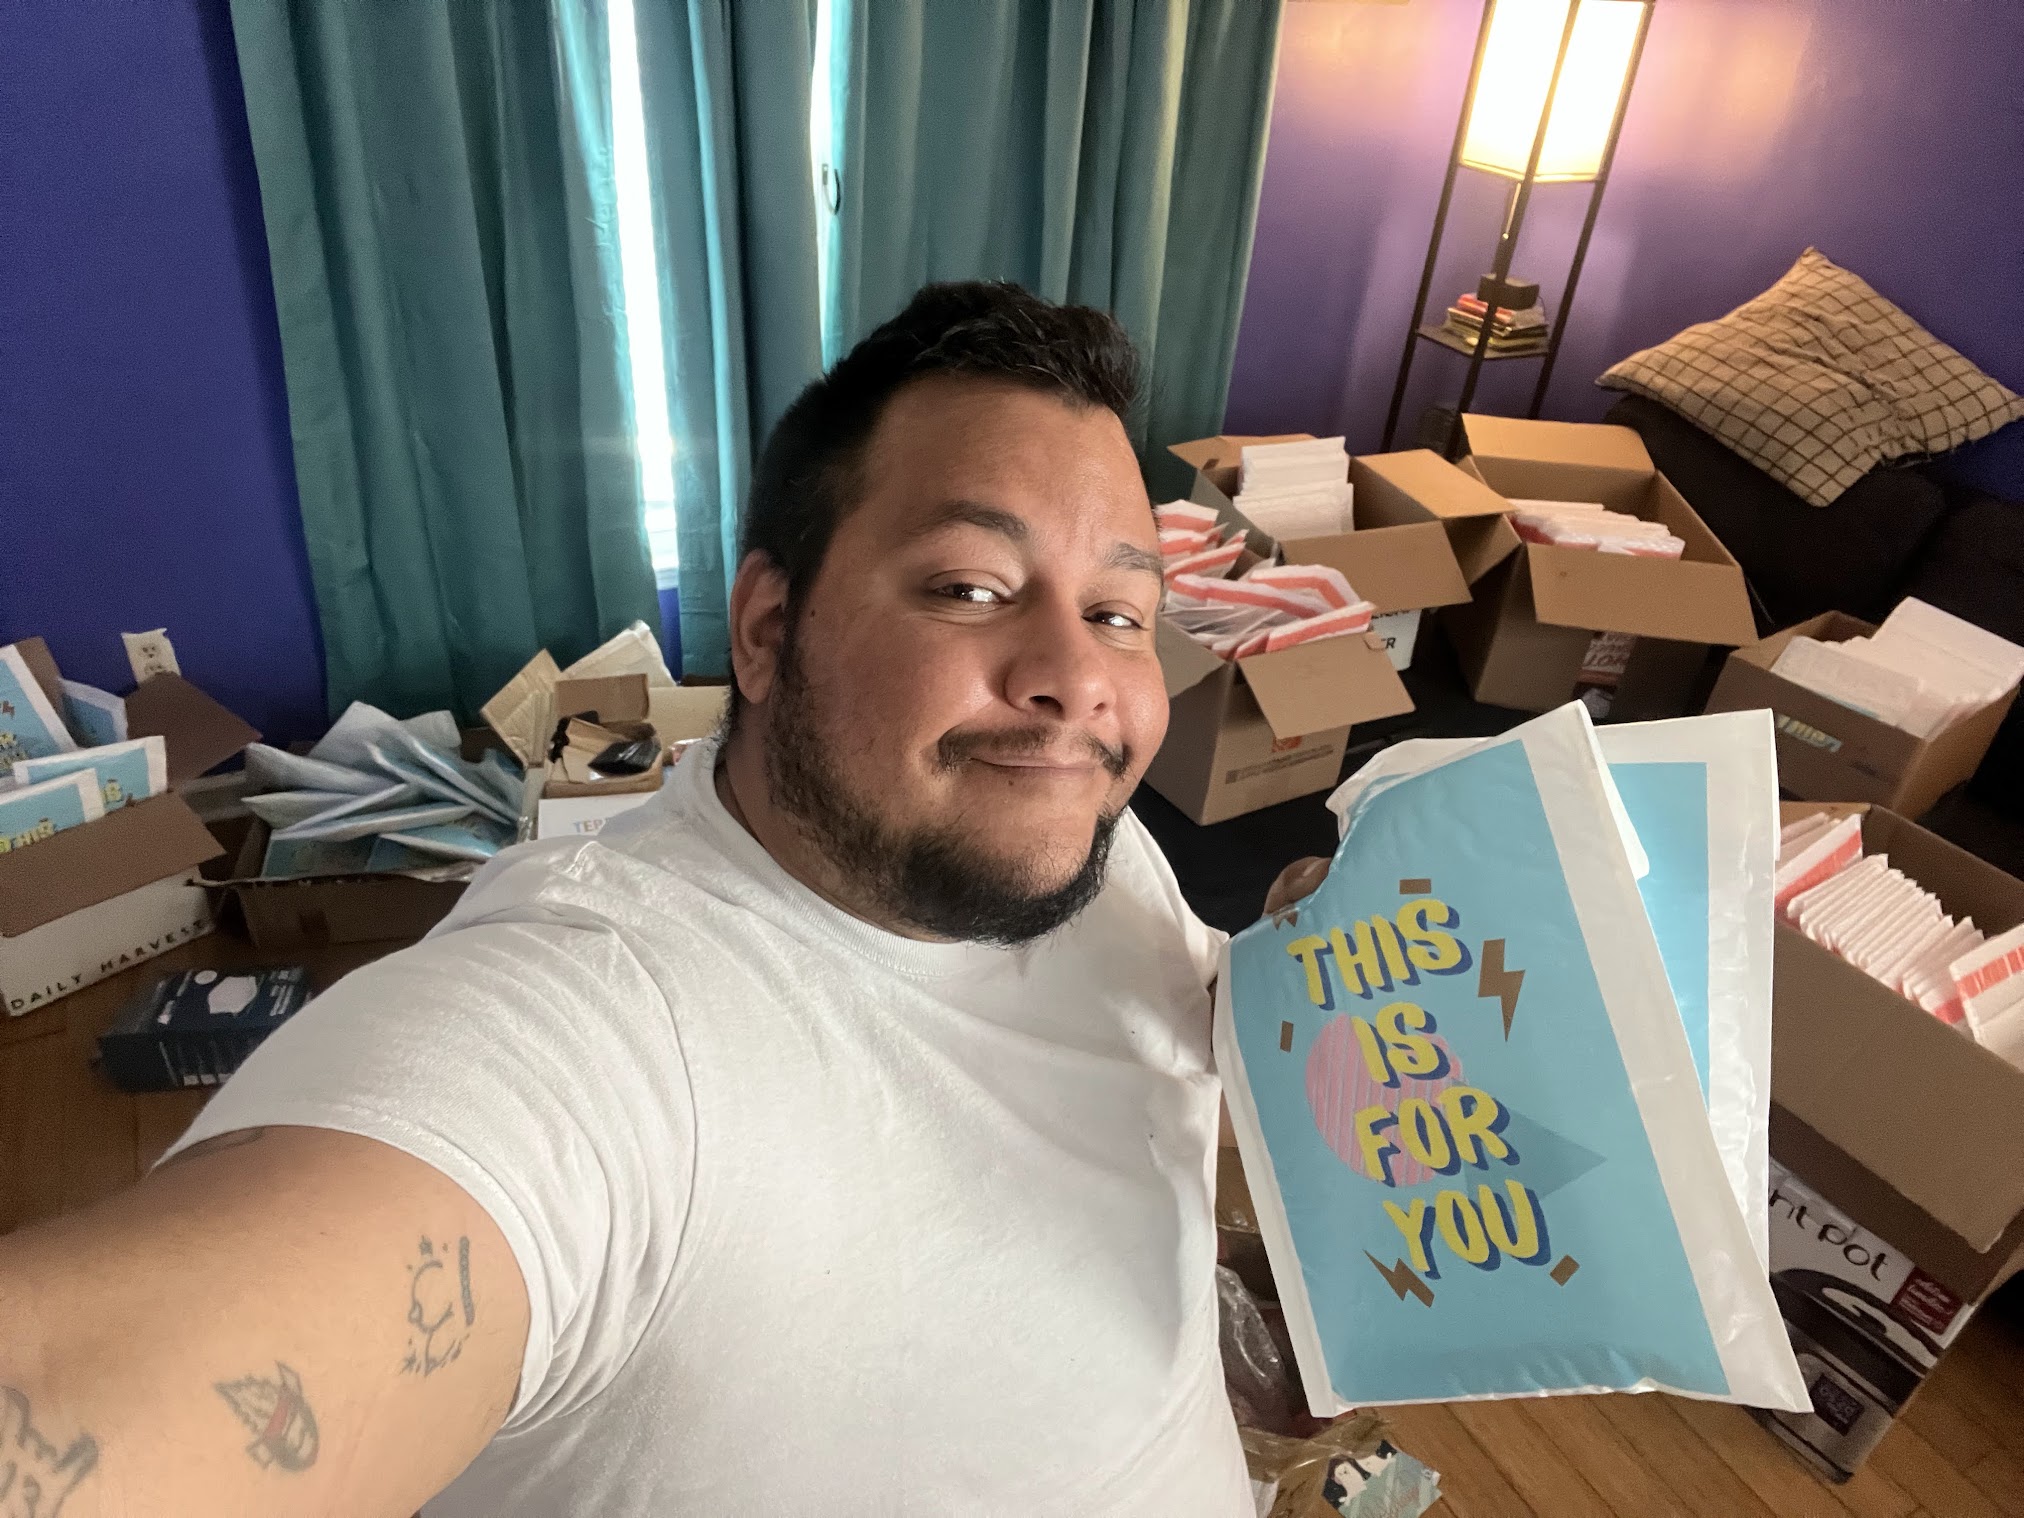 Founder Jack Knoxville is shown wearing a white Tshirt and smiling in a selfie while  taking a break from packaging safety kits for the community.